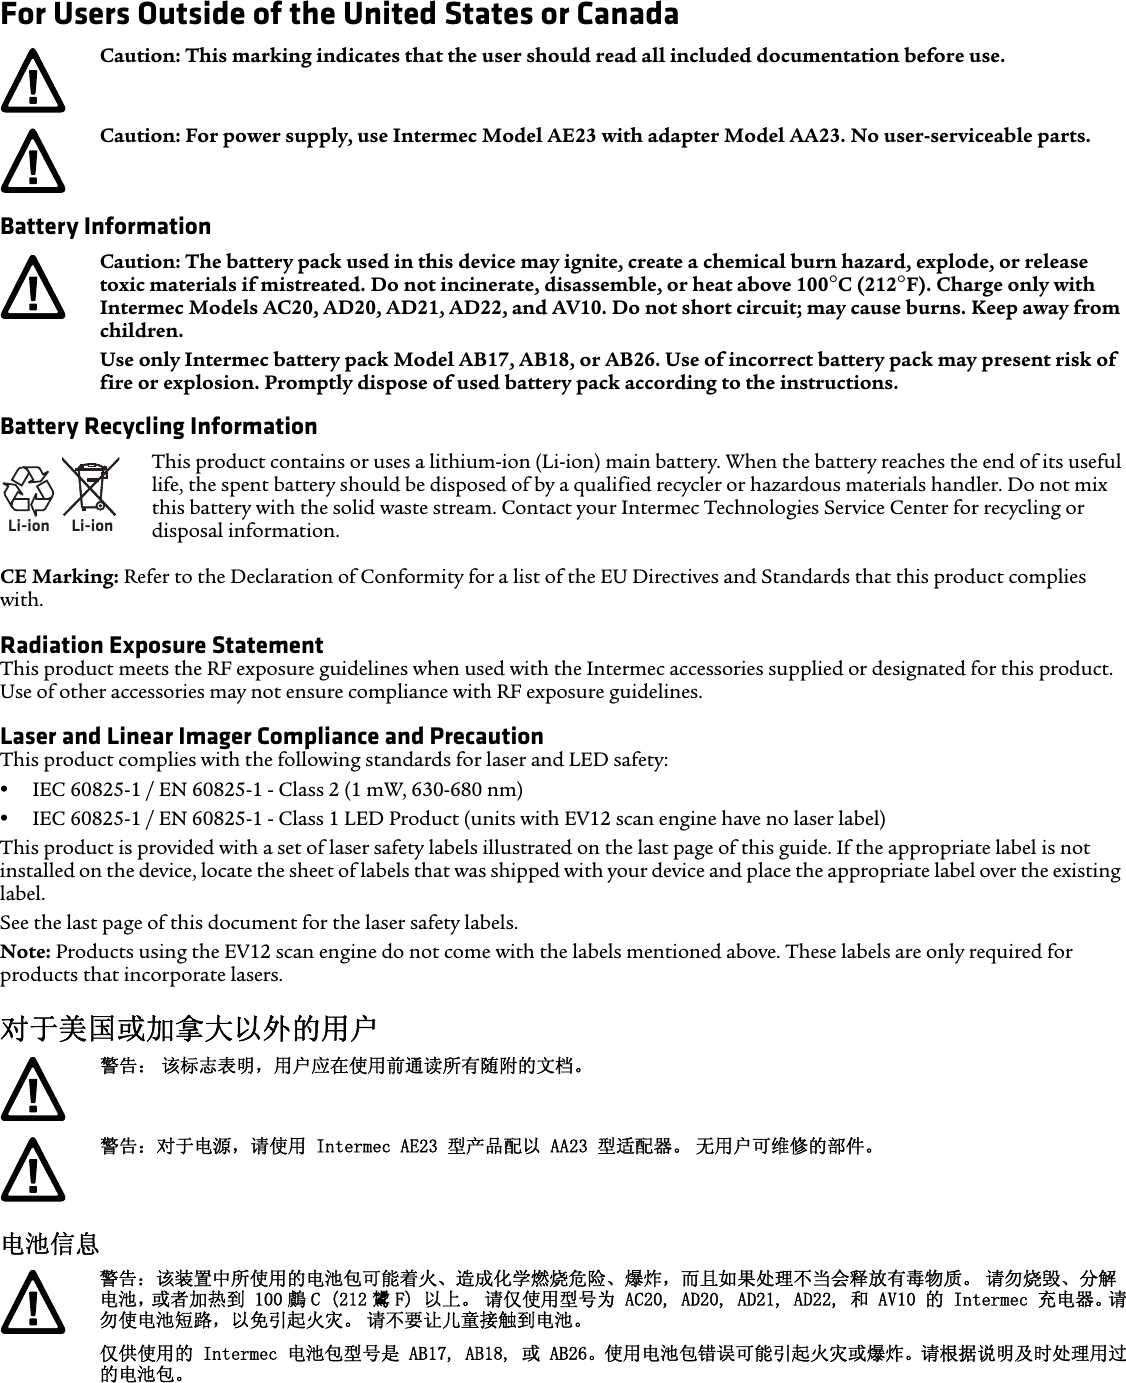 For Users Outside of the United States or Canada  Battery Information Battery Recycling InformationCE Marking: Refer to the Declaration of Conformity for a list of the EU Directives and Standards that this product complies with.Radiation Exposure StatementThis product meets the RF exposure guidelines when used with the Intermec accessories supplied or designated for this product. Use of other accessories may not ensure compliance with RF exposure guidelines.Laser and Linear Imager Compliance and PrecautionThis product complies with the following standards for laser and LED safety:•IEC 60825-1 / EN 60825-1 - Class 2 (1 mW, 630-680 nm)•IEC 60825-1 / EN 60825-1 - Class 1 LED Product (units with EV12 scan engine have no laser label)This product is provided with a set of laser safety labels illustrated on the last page of this guide. If the appropriate label is not installed on the device, locate the sheet of labels that was shipped with your device and place the appropriate label over the existing label.See the last page of this document for the laser safety labels.Note: Products using the EV12 scan engine do not come with the labels mentioned above. These labels are only required for products that incorporate lasers.对于美国或加拿大以外的用户   电池信息 Caution: This marking indicates that the user should read all included documentation before use.Caution: For power supply, use Intermec Model AE23 with adapter Model AA23. No user-serviceable parts.Caution: The battery pack used in this device may ignite, create a chemical burn hazard, explode, or release toxic materials if mistreated. Do not incinerate, disassemble, or heat above 100°C (212°F). Charge only with Intermec Models AC20, AD20, AD21, AD22, and AV10. Do not short circuit; may cause burns. Keep away from children. Use only Intermec battery pack Model AB17, AB18, or AB26. Use of incorrect battery pack may present risk of fire or explosion. Promptly dispose of used battery pack according to the instructions.Li-ionLi-ionThis product contains or uses a lithium-ion (Li-ion) main battery. When the battery reaches the end of its useful life, the spent battery should be disposed of by a qualified recycler or hazardous materials handler. Do not mix this battery with the solid waste stream. Contact your Intermec Technologies Service Center for recycling or disposal information.警告： 该标志表明，用户应在使用前通读所有随附的文档。警告：对于电源，请使用 Intermec AE23 型产品配以 AA23 型适配器。 无用户可维修的部件。警告：该装置中所使用的电池包可能着火、造成化学燃烧危险、爆炸，而且如果处理不当会释放有毒物质。 请勿烧毁、分解电池，或者加热到 100 鸆 C (212 鸉 F) 以上。 请仅使用型号为 AC20, AD20, AD21, AD22, 和 AV10 的 Intermec 充电器。请勿使电池短路，以免引起火灾。 请不要让儿童接触到电池。仅供使用的 Intermec 电池包型号是 AB17, AB18, 或 AB26。使用电池包错误可能引起火灾或爆炸。请根据说明及时处理用过的电池包。